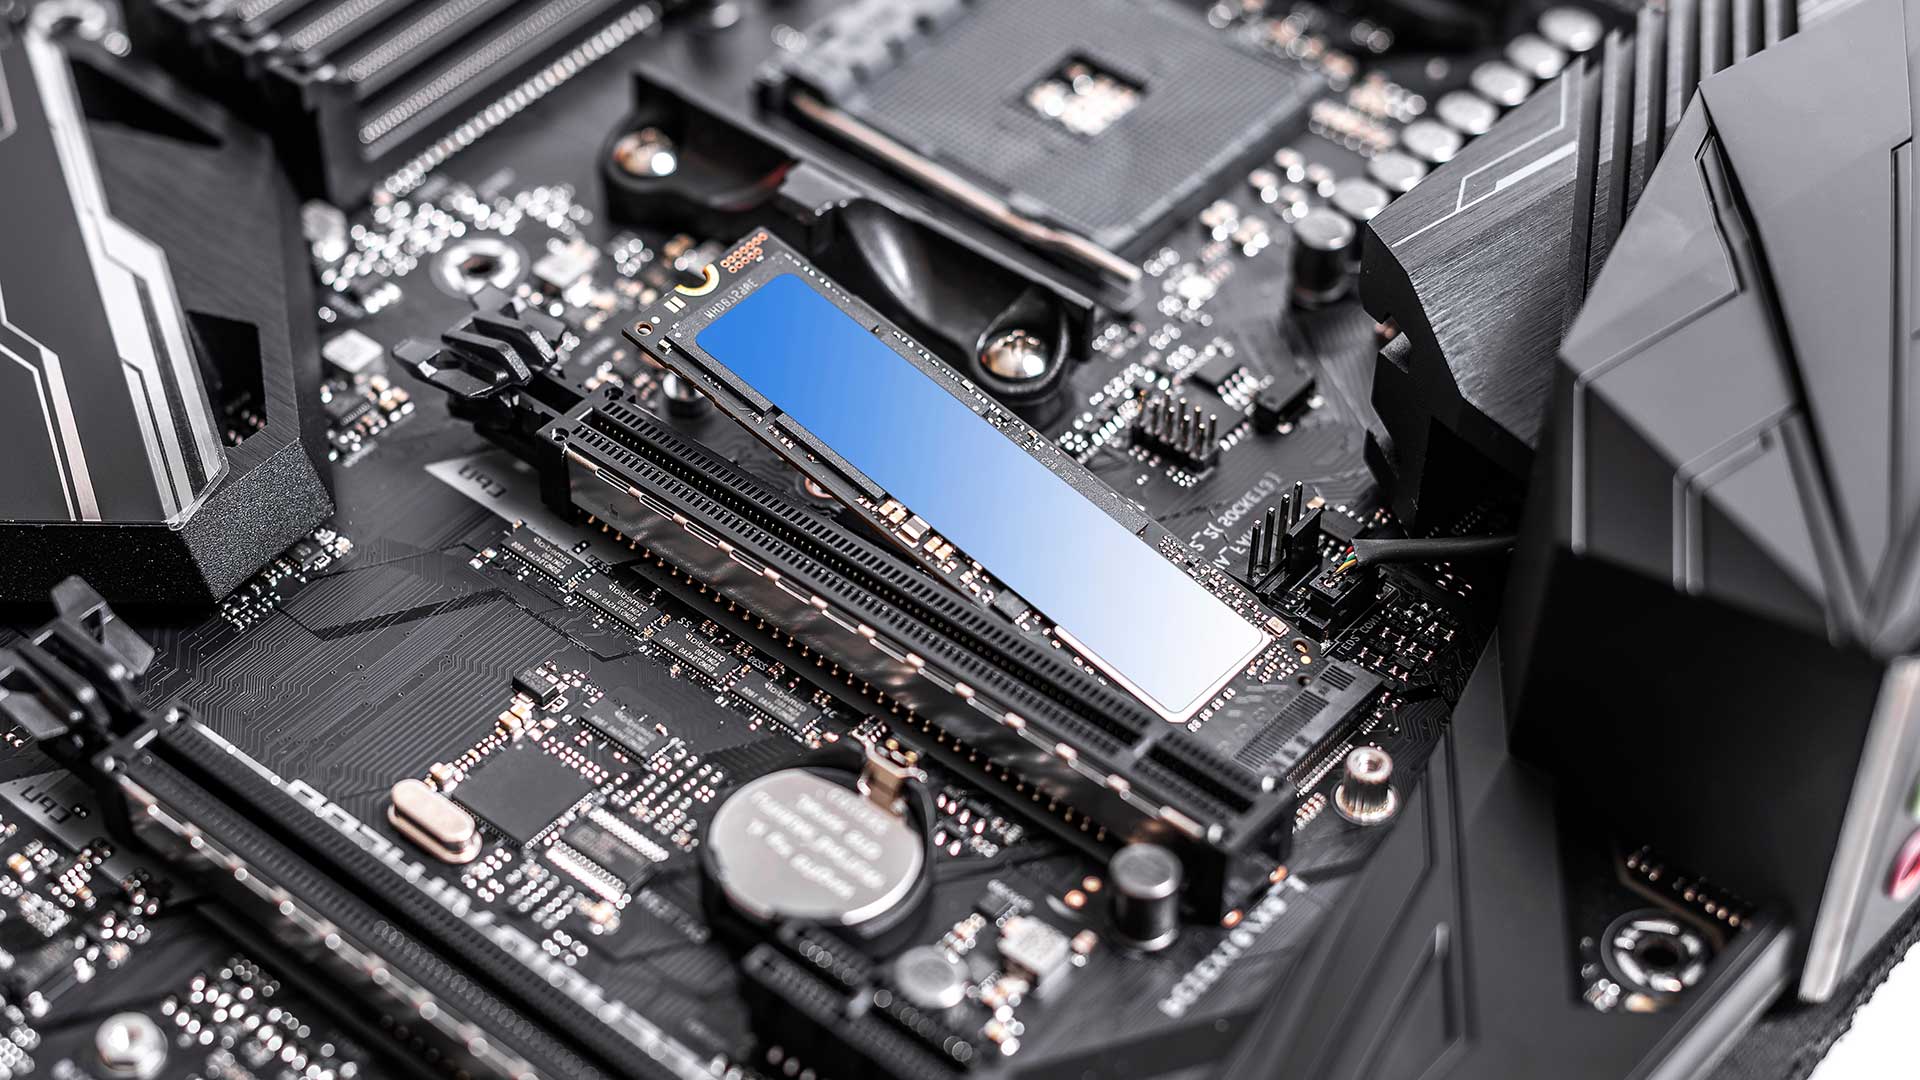 what is an ssd - an image of m.2 ssd storage being installed into a motherboard